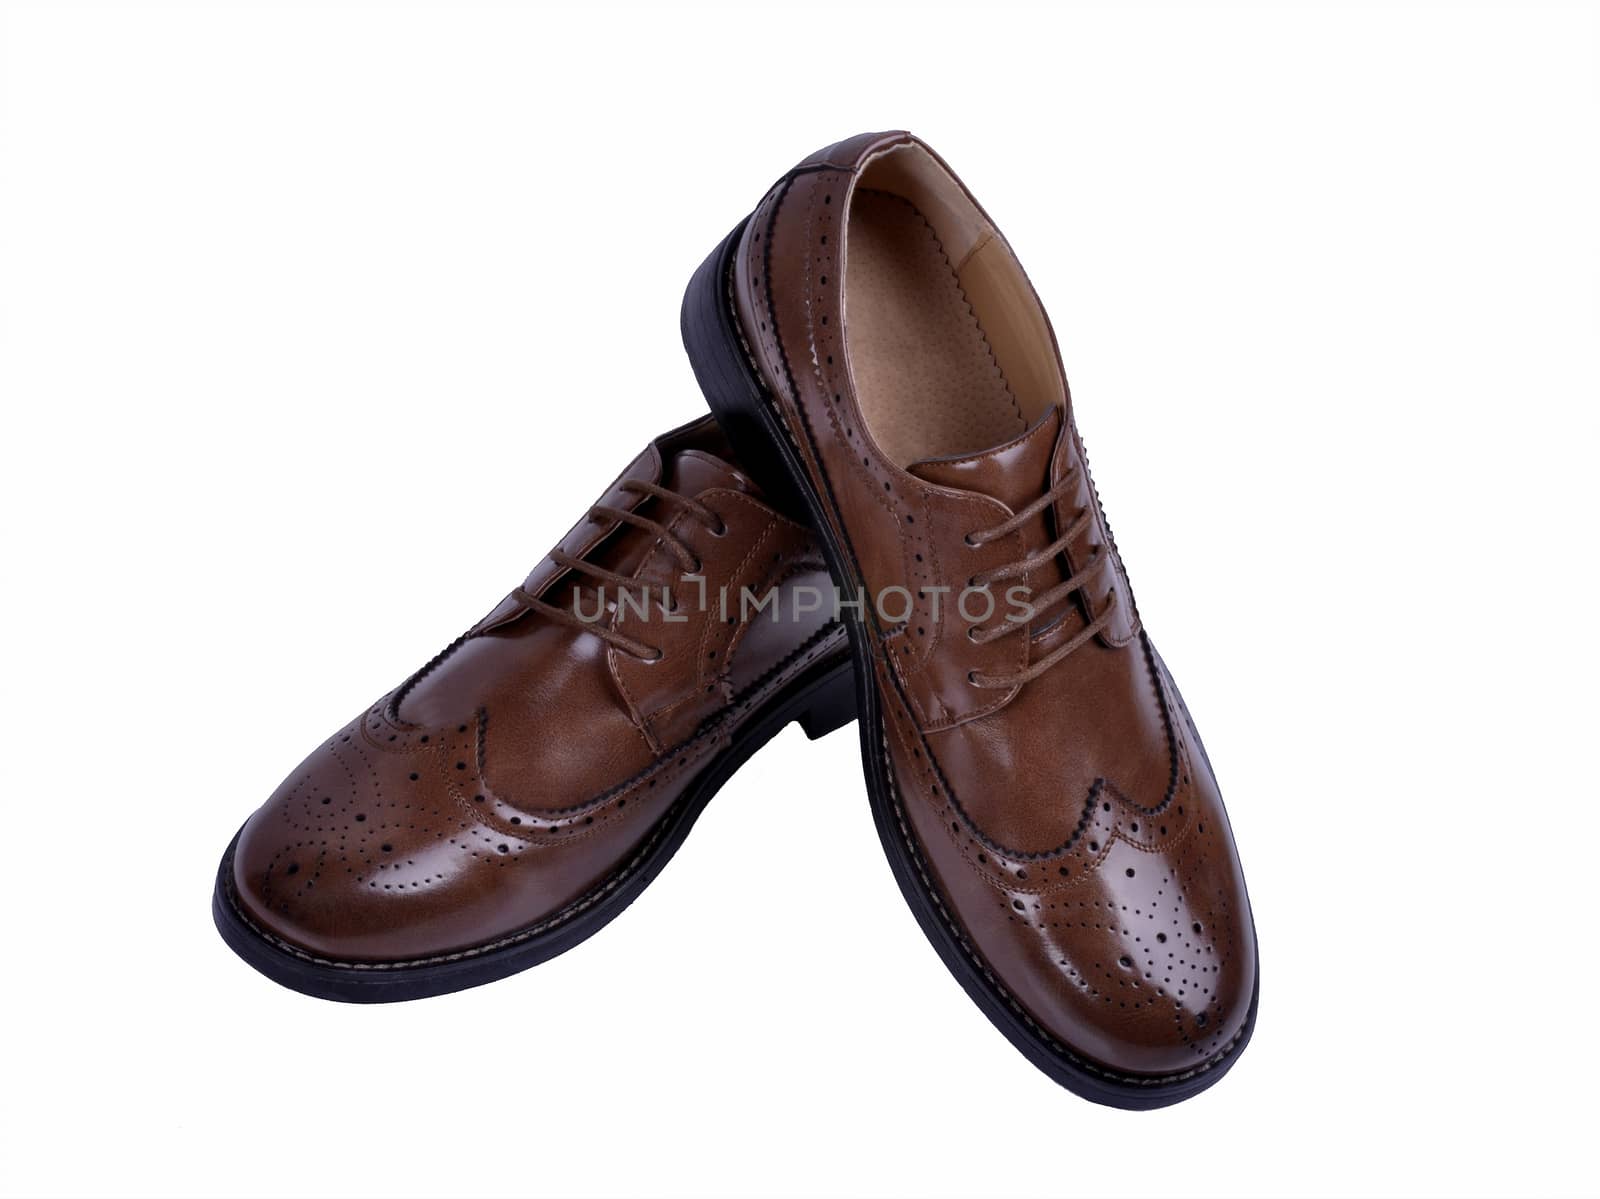 Men's classic brown leather shoes isolated on white background by Nikola30